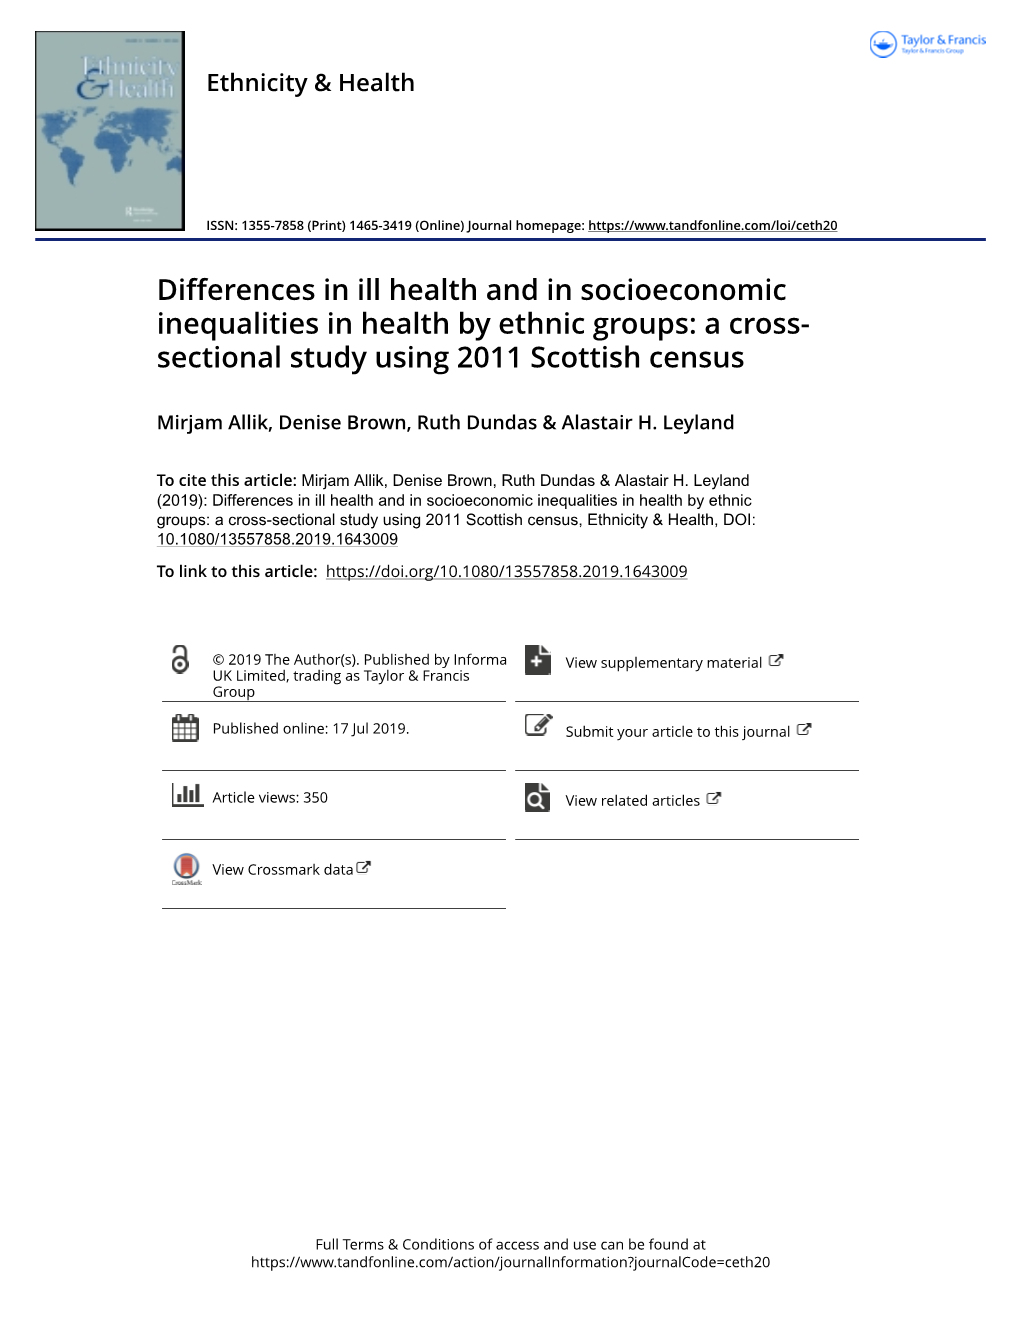 Differences in Ill Health and in Socioeconomic Inequalities in Health by Ethnic Groups: a Cross- Sectional Study Using 2011 Scottish Census